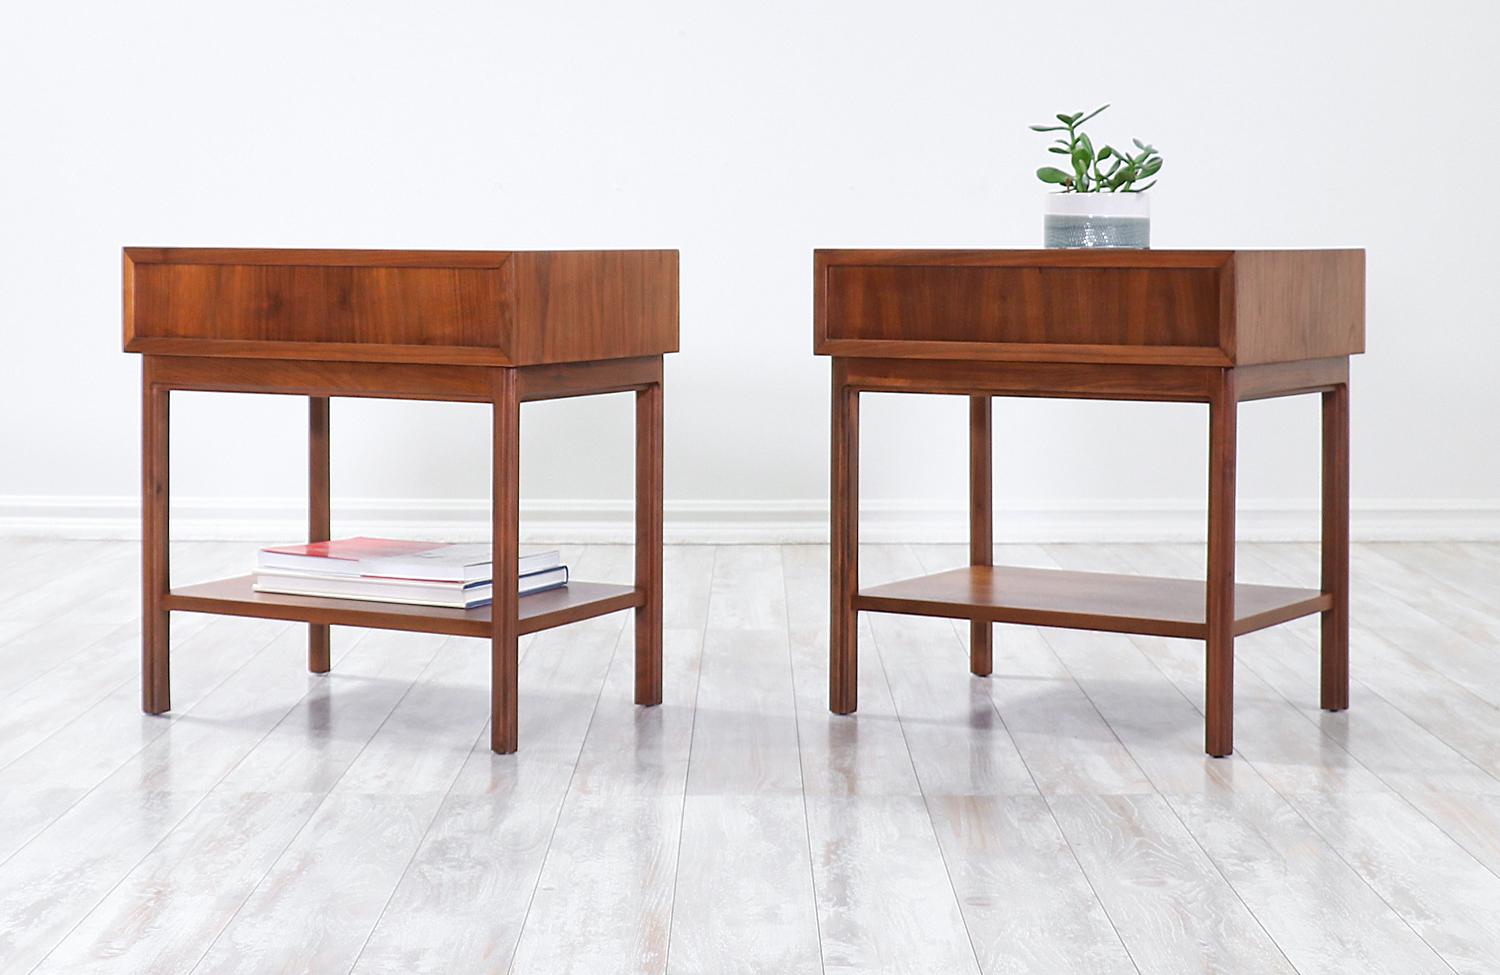 Mid-Century Modern Two-tier Nightstands Designed by Jack Cartwright for Founders circa 1963